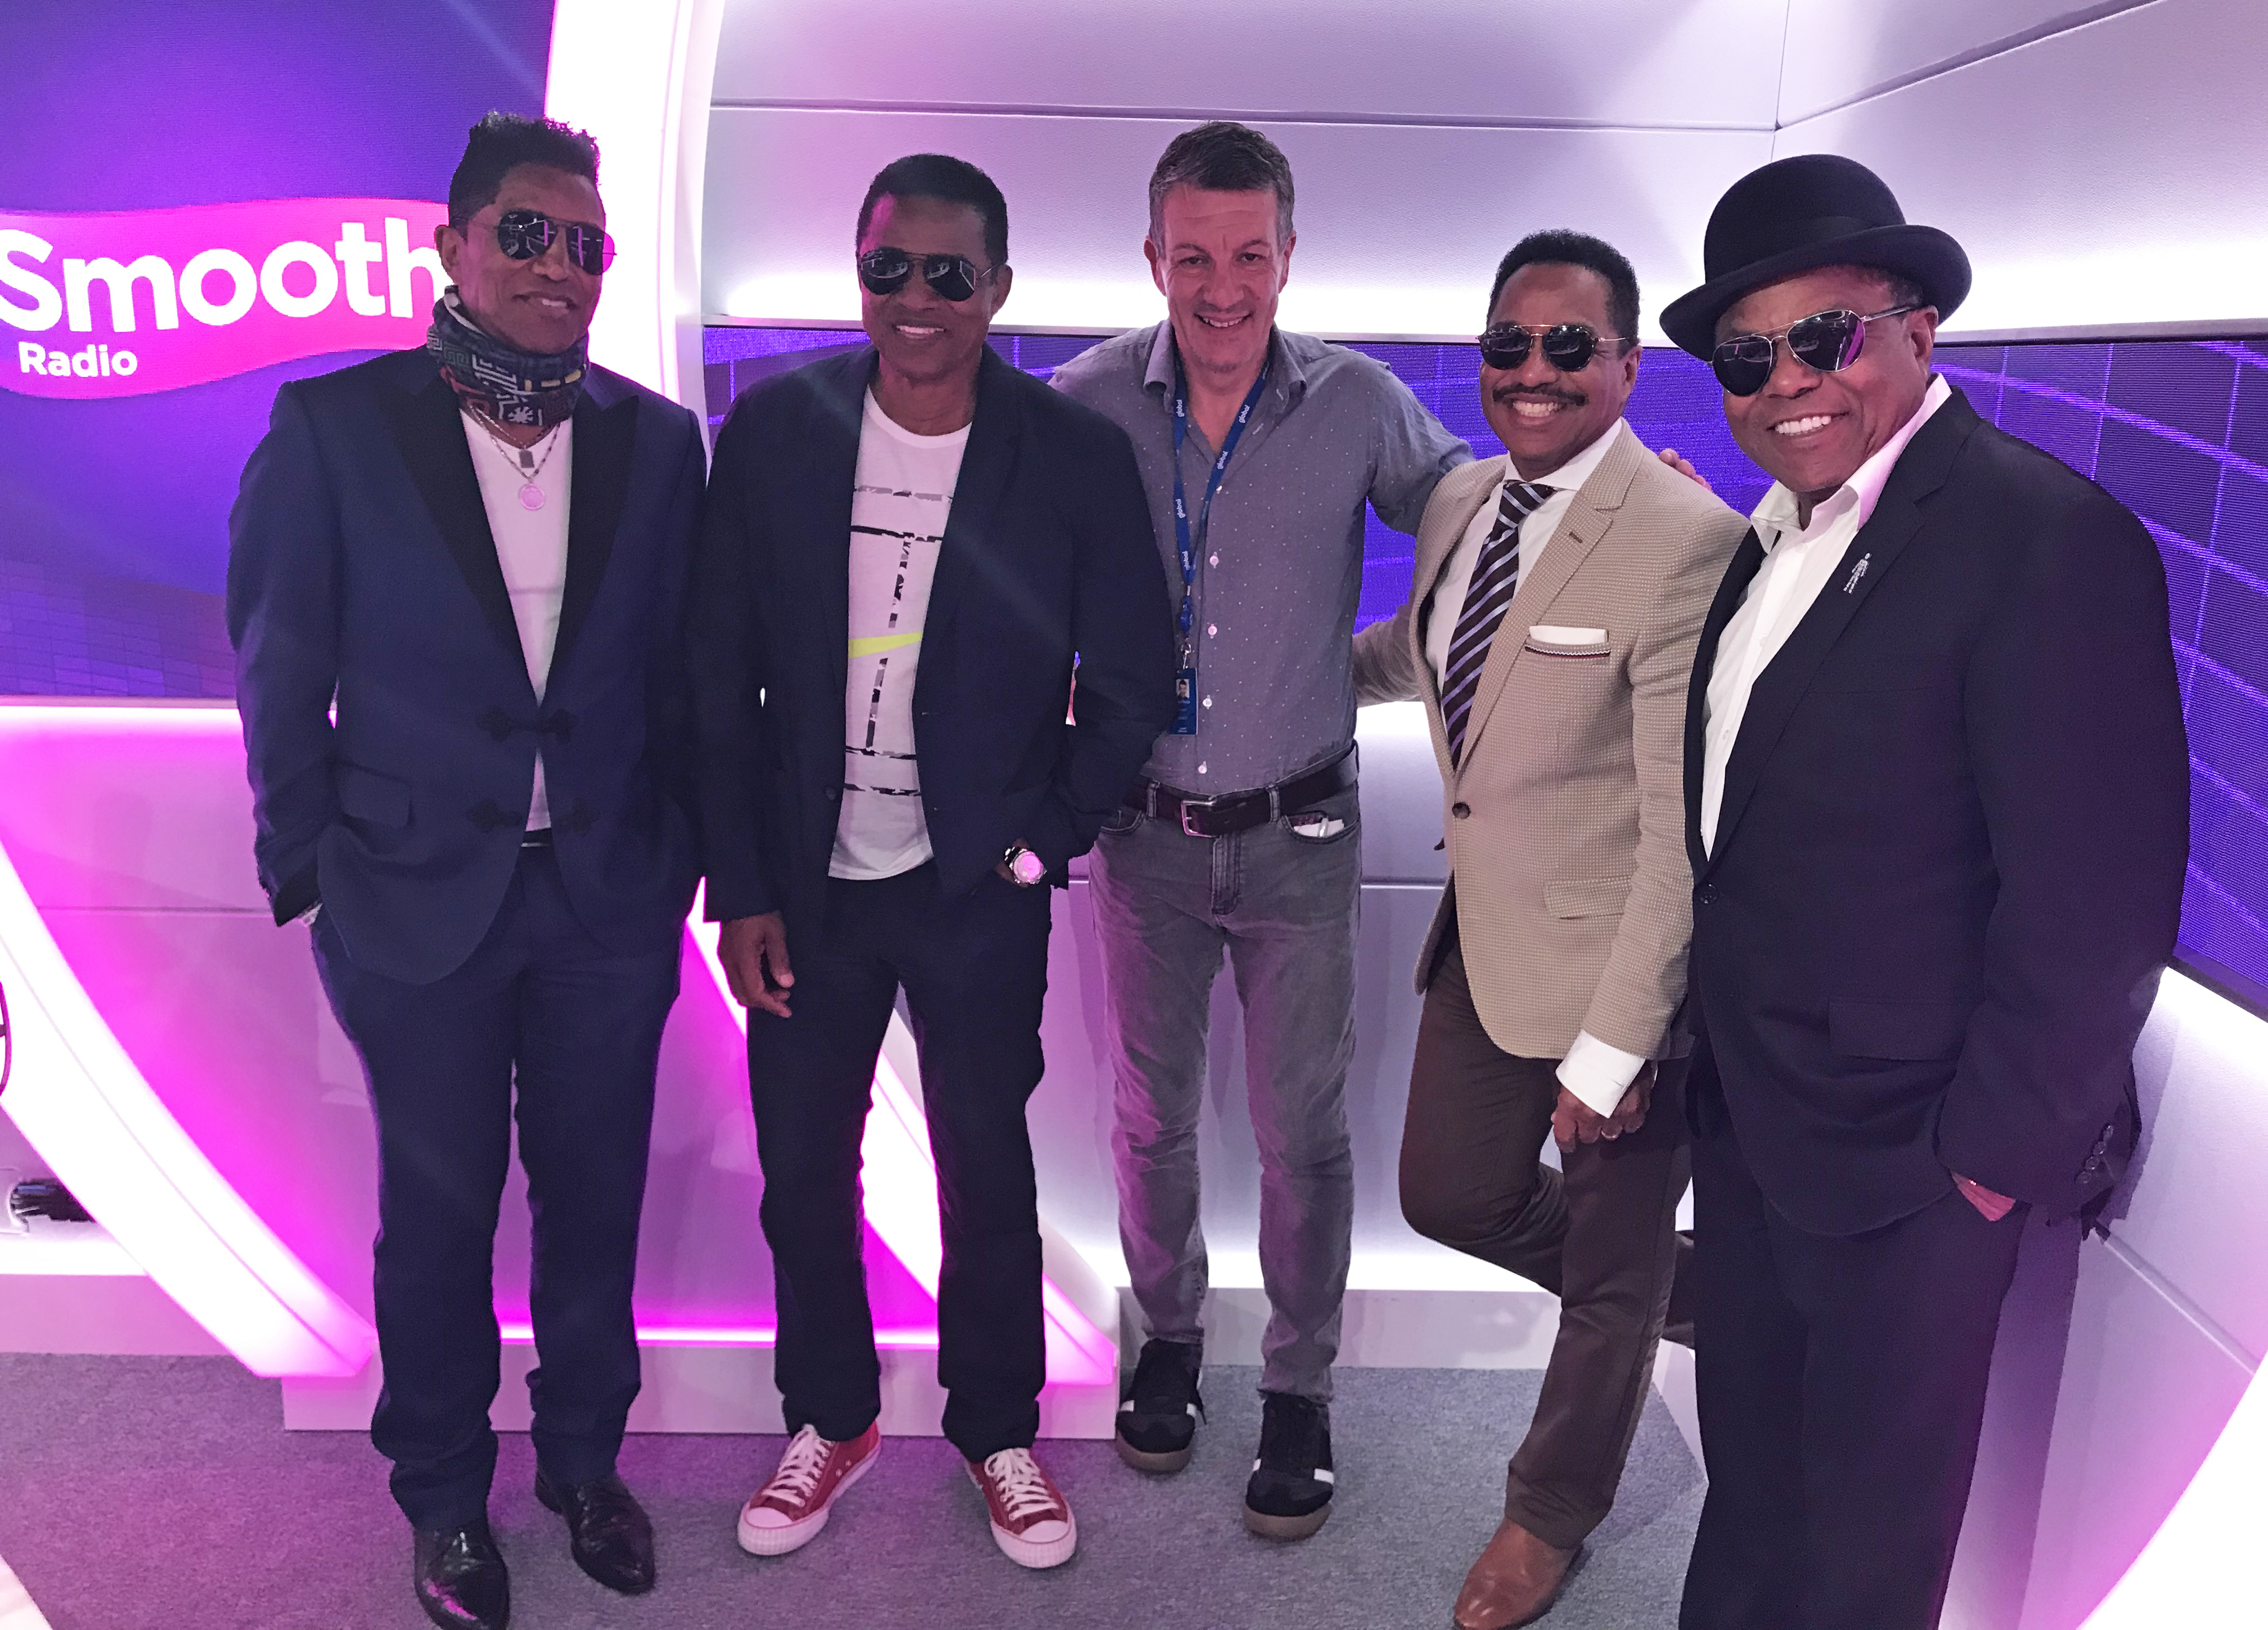 The Jacksons and Smooth